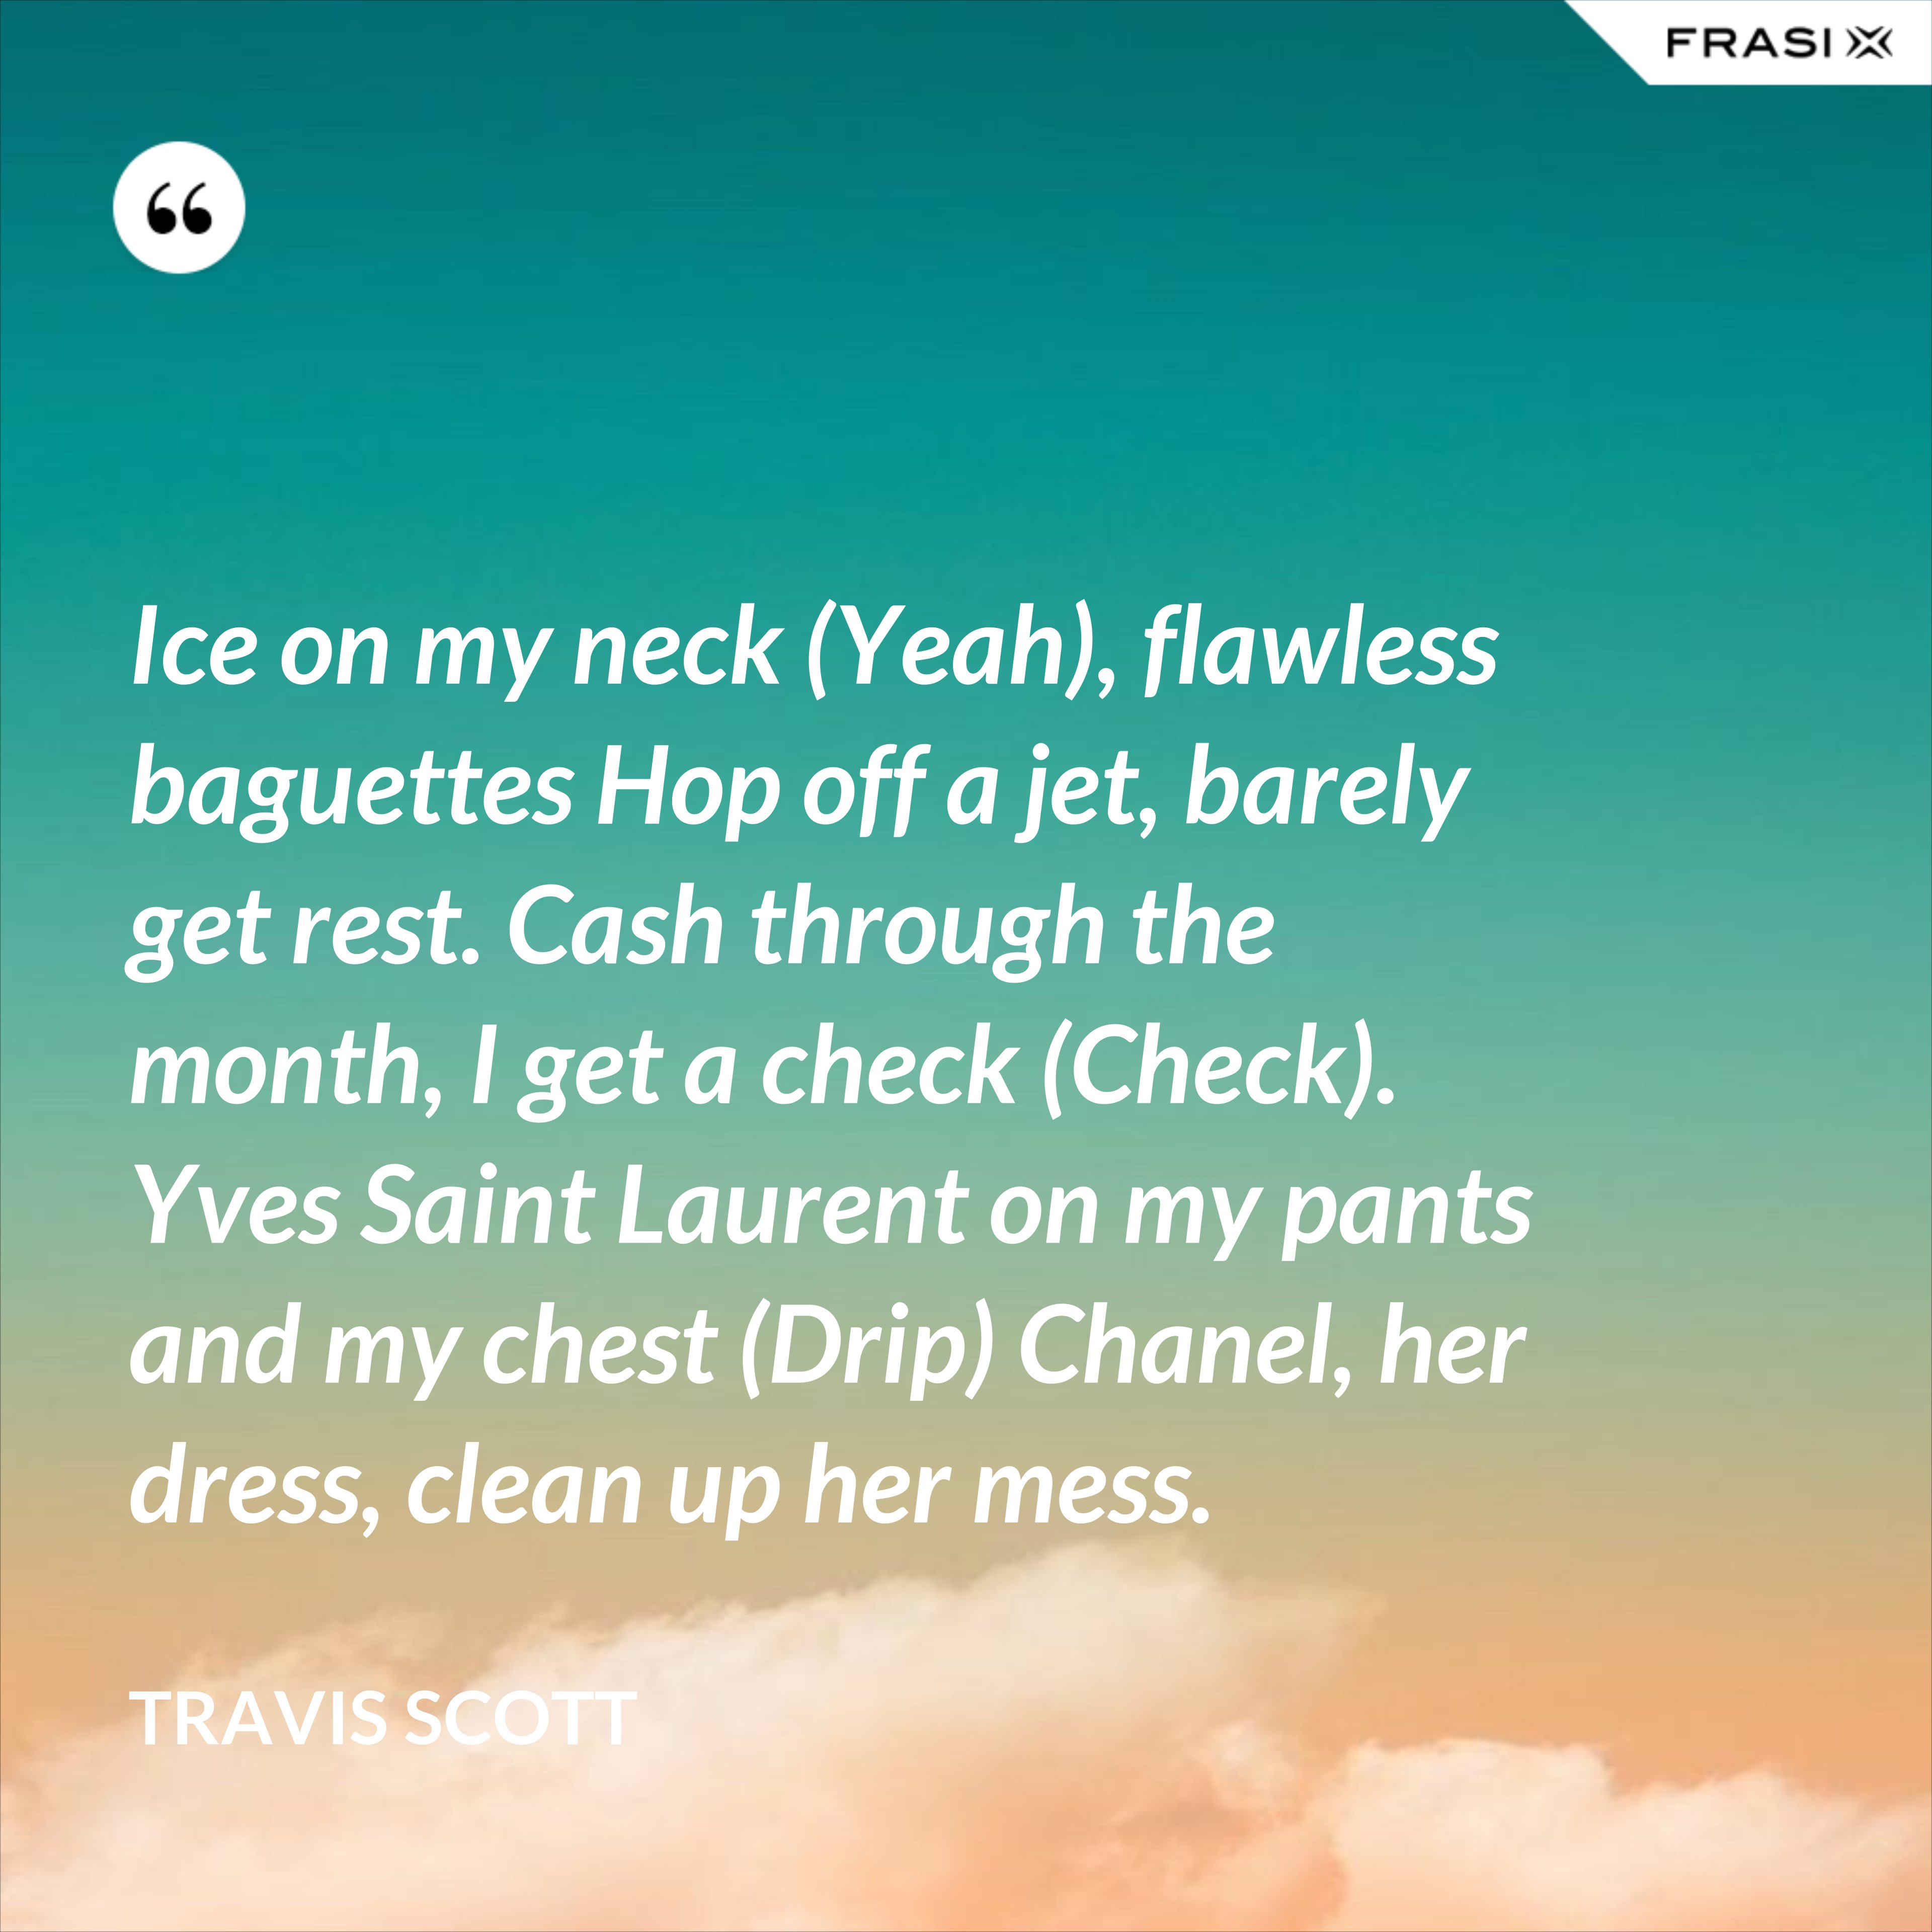 Ice on my neck (Yeah), flawless baguettes Hop off a jet, barely get rest. Cash through the month, I get a check (Check). Yves Saint Laurent on my pants and my chest (Drip) Chanel, her dress, clean up her mess. - Travis Scott